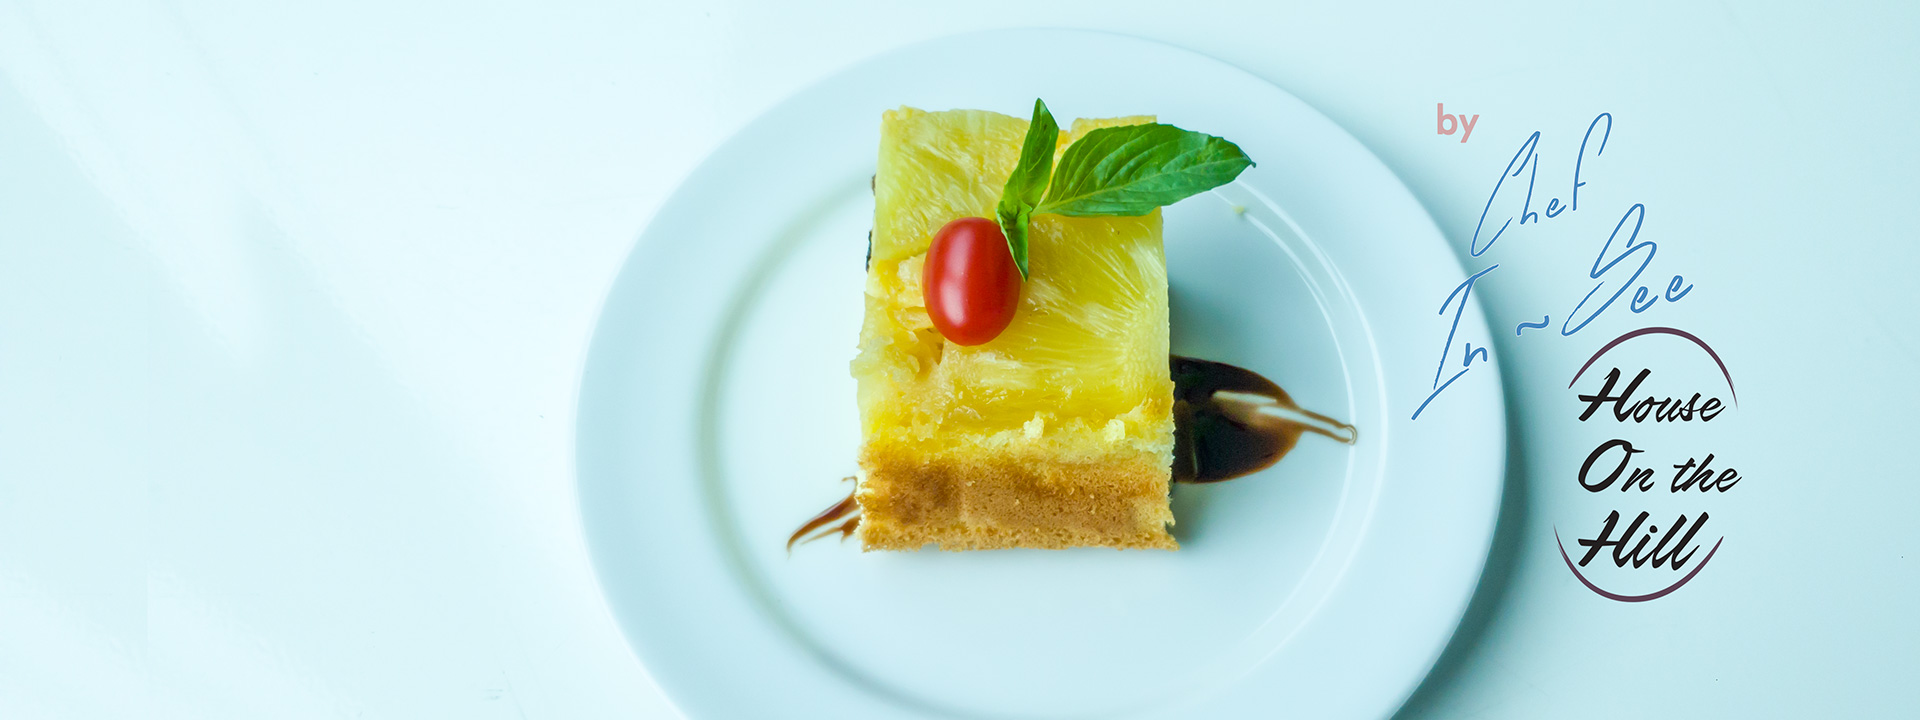 Pineapple Upside Down pastry in restaurant of Pattaya Hotels.